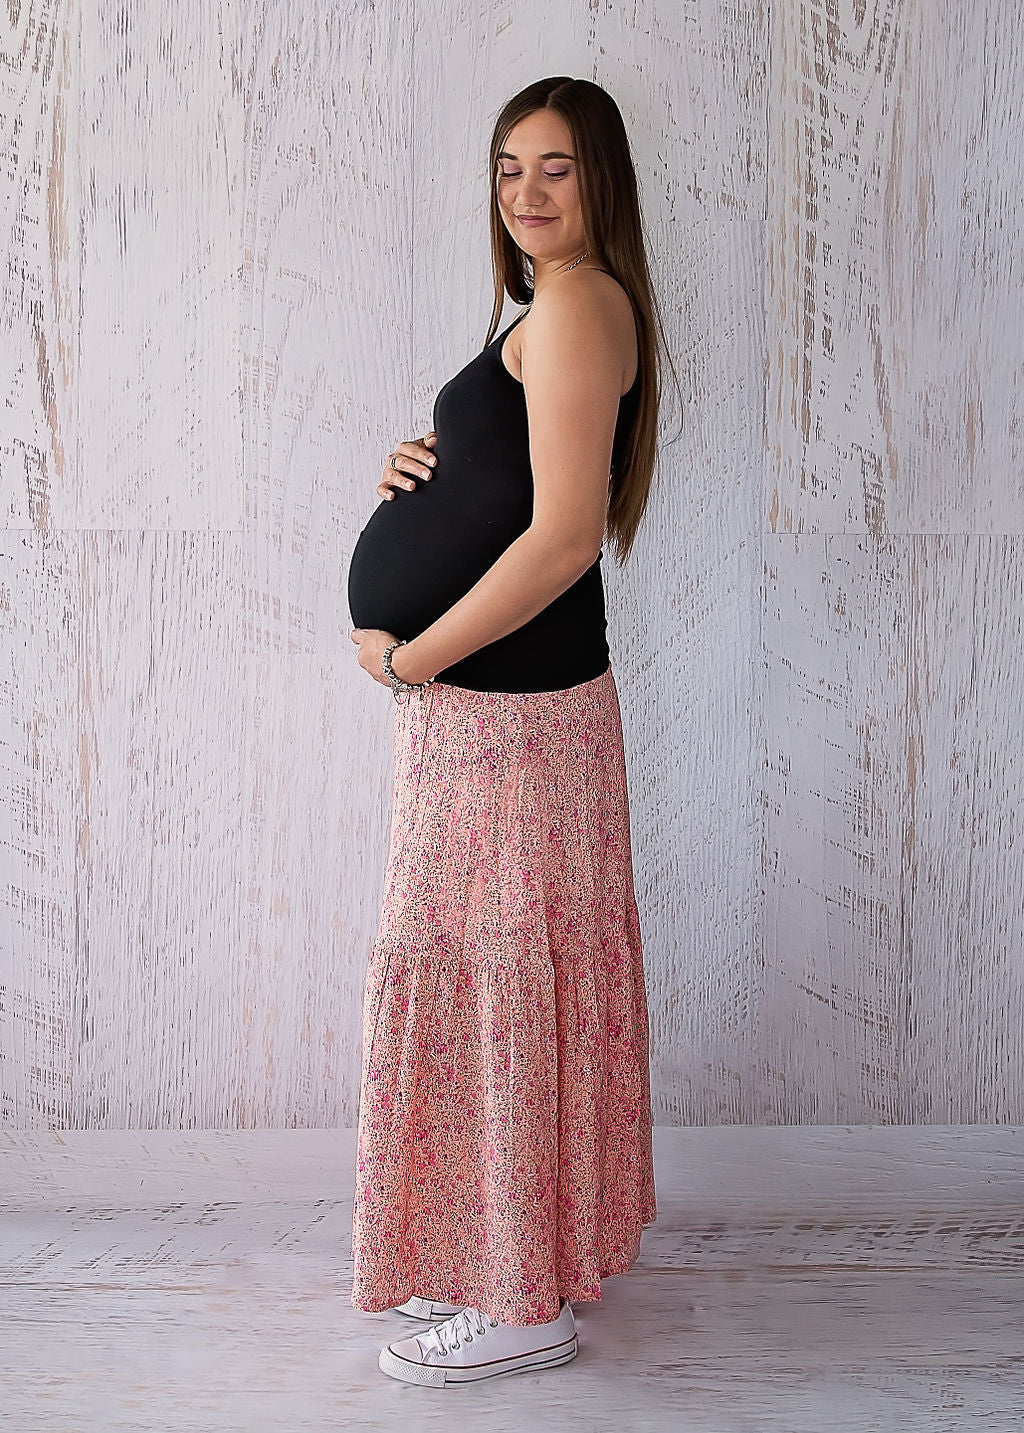 10 Gorgeous Black Maternity Skirt To Wear To Work (or a Special Occasion) | Maternity  skirt, Maternity skirt outfits, Cute maternity outfits